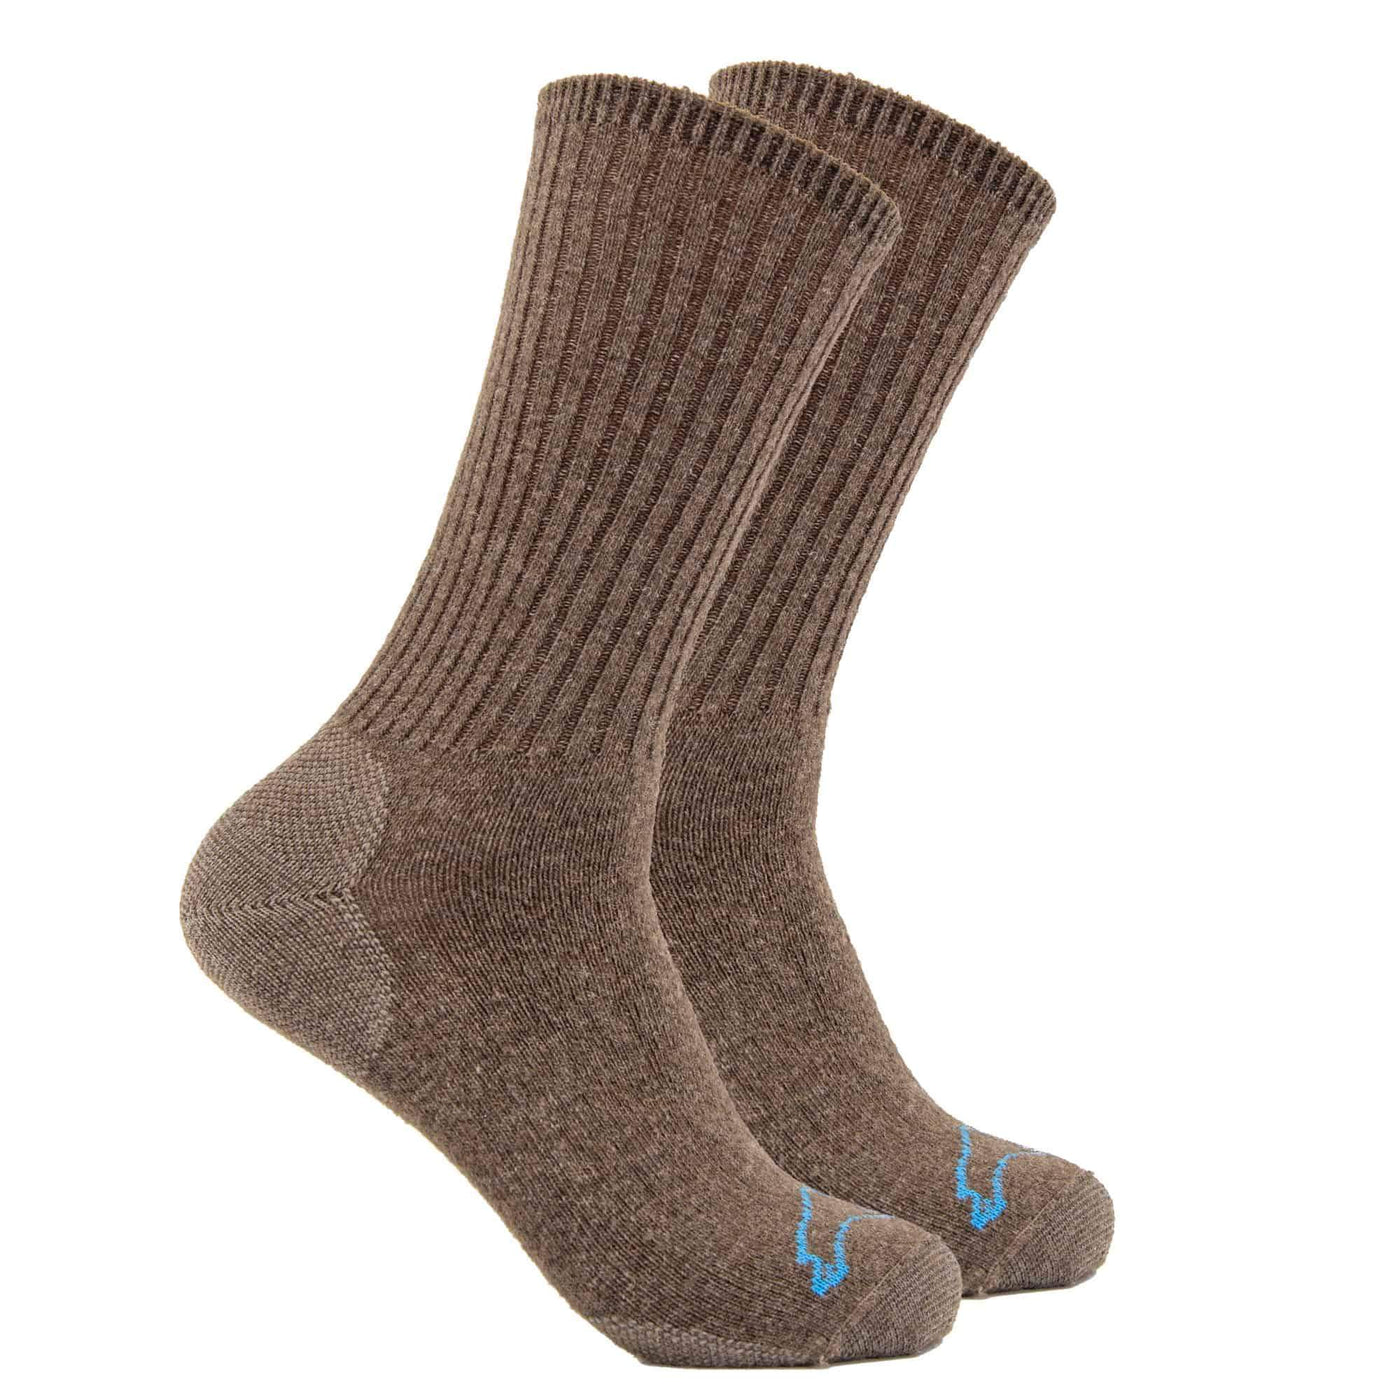 Why You Should Invest in Appropriate Socks for Each Season – Meriwool